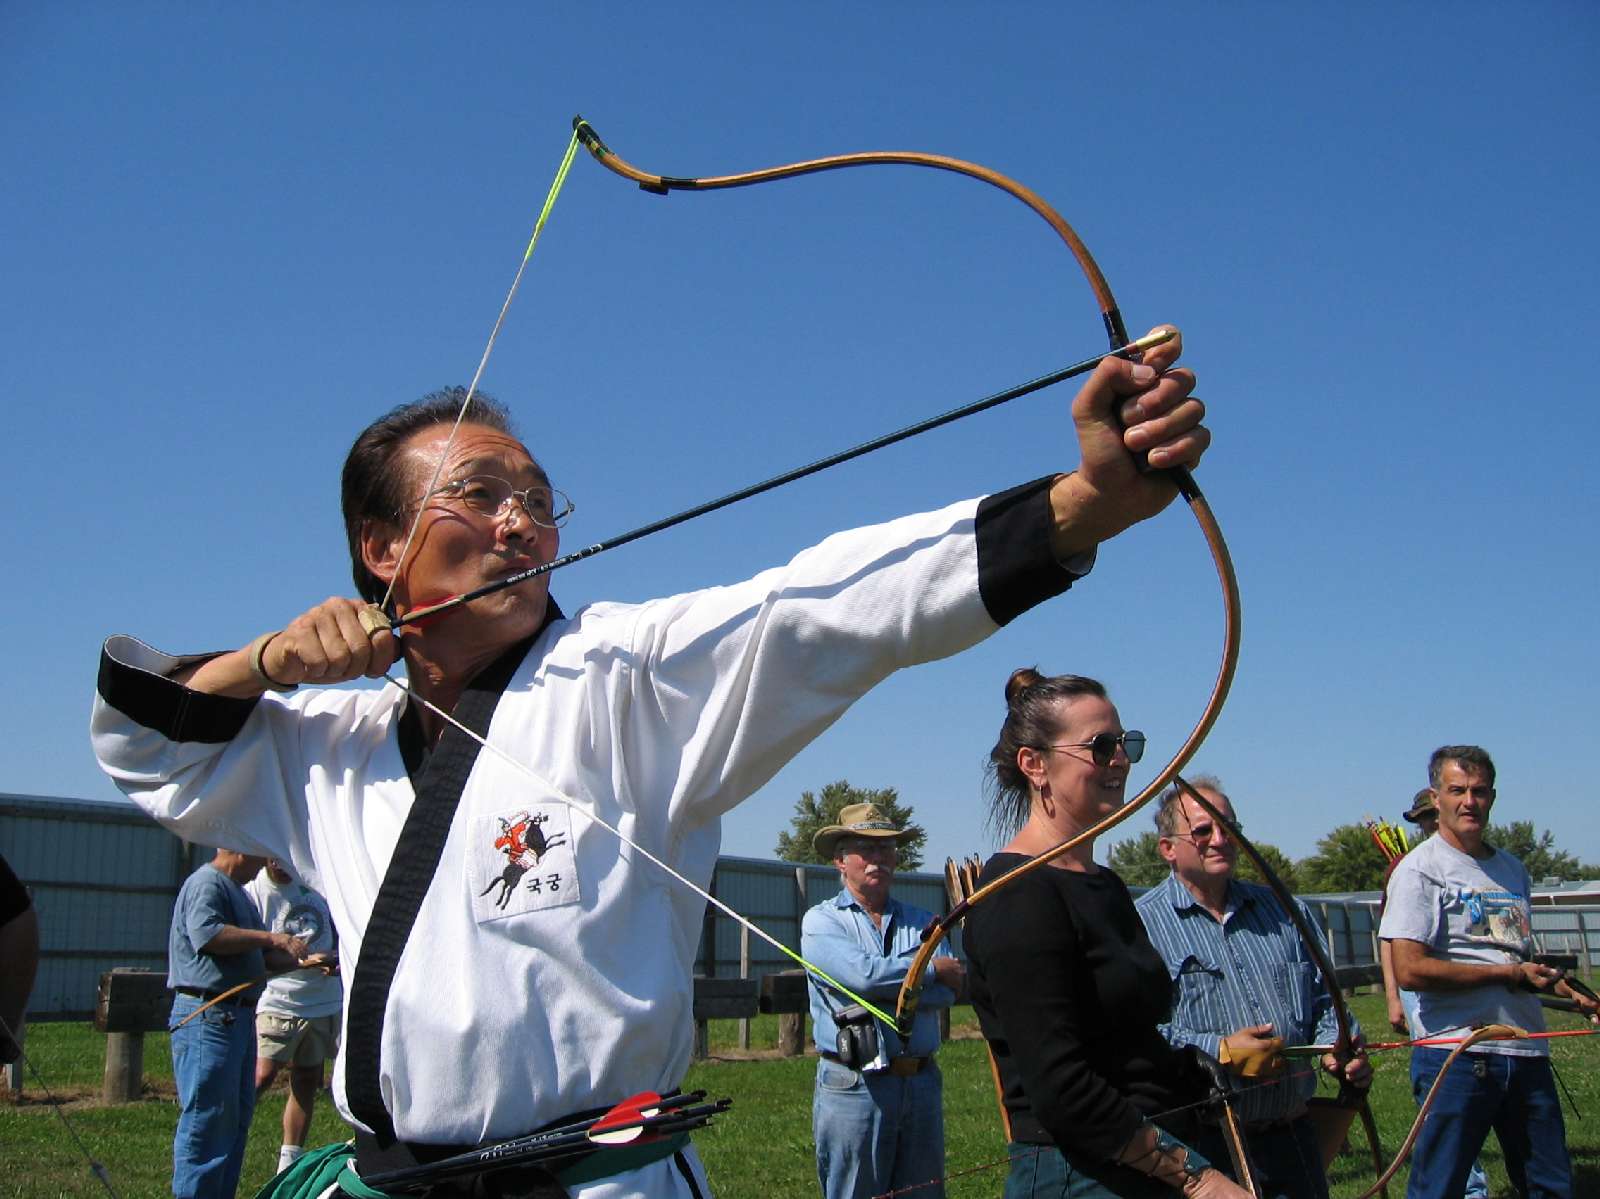 a man holding a bow and arrow in a field.